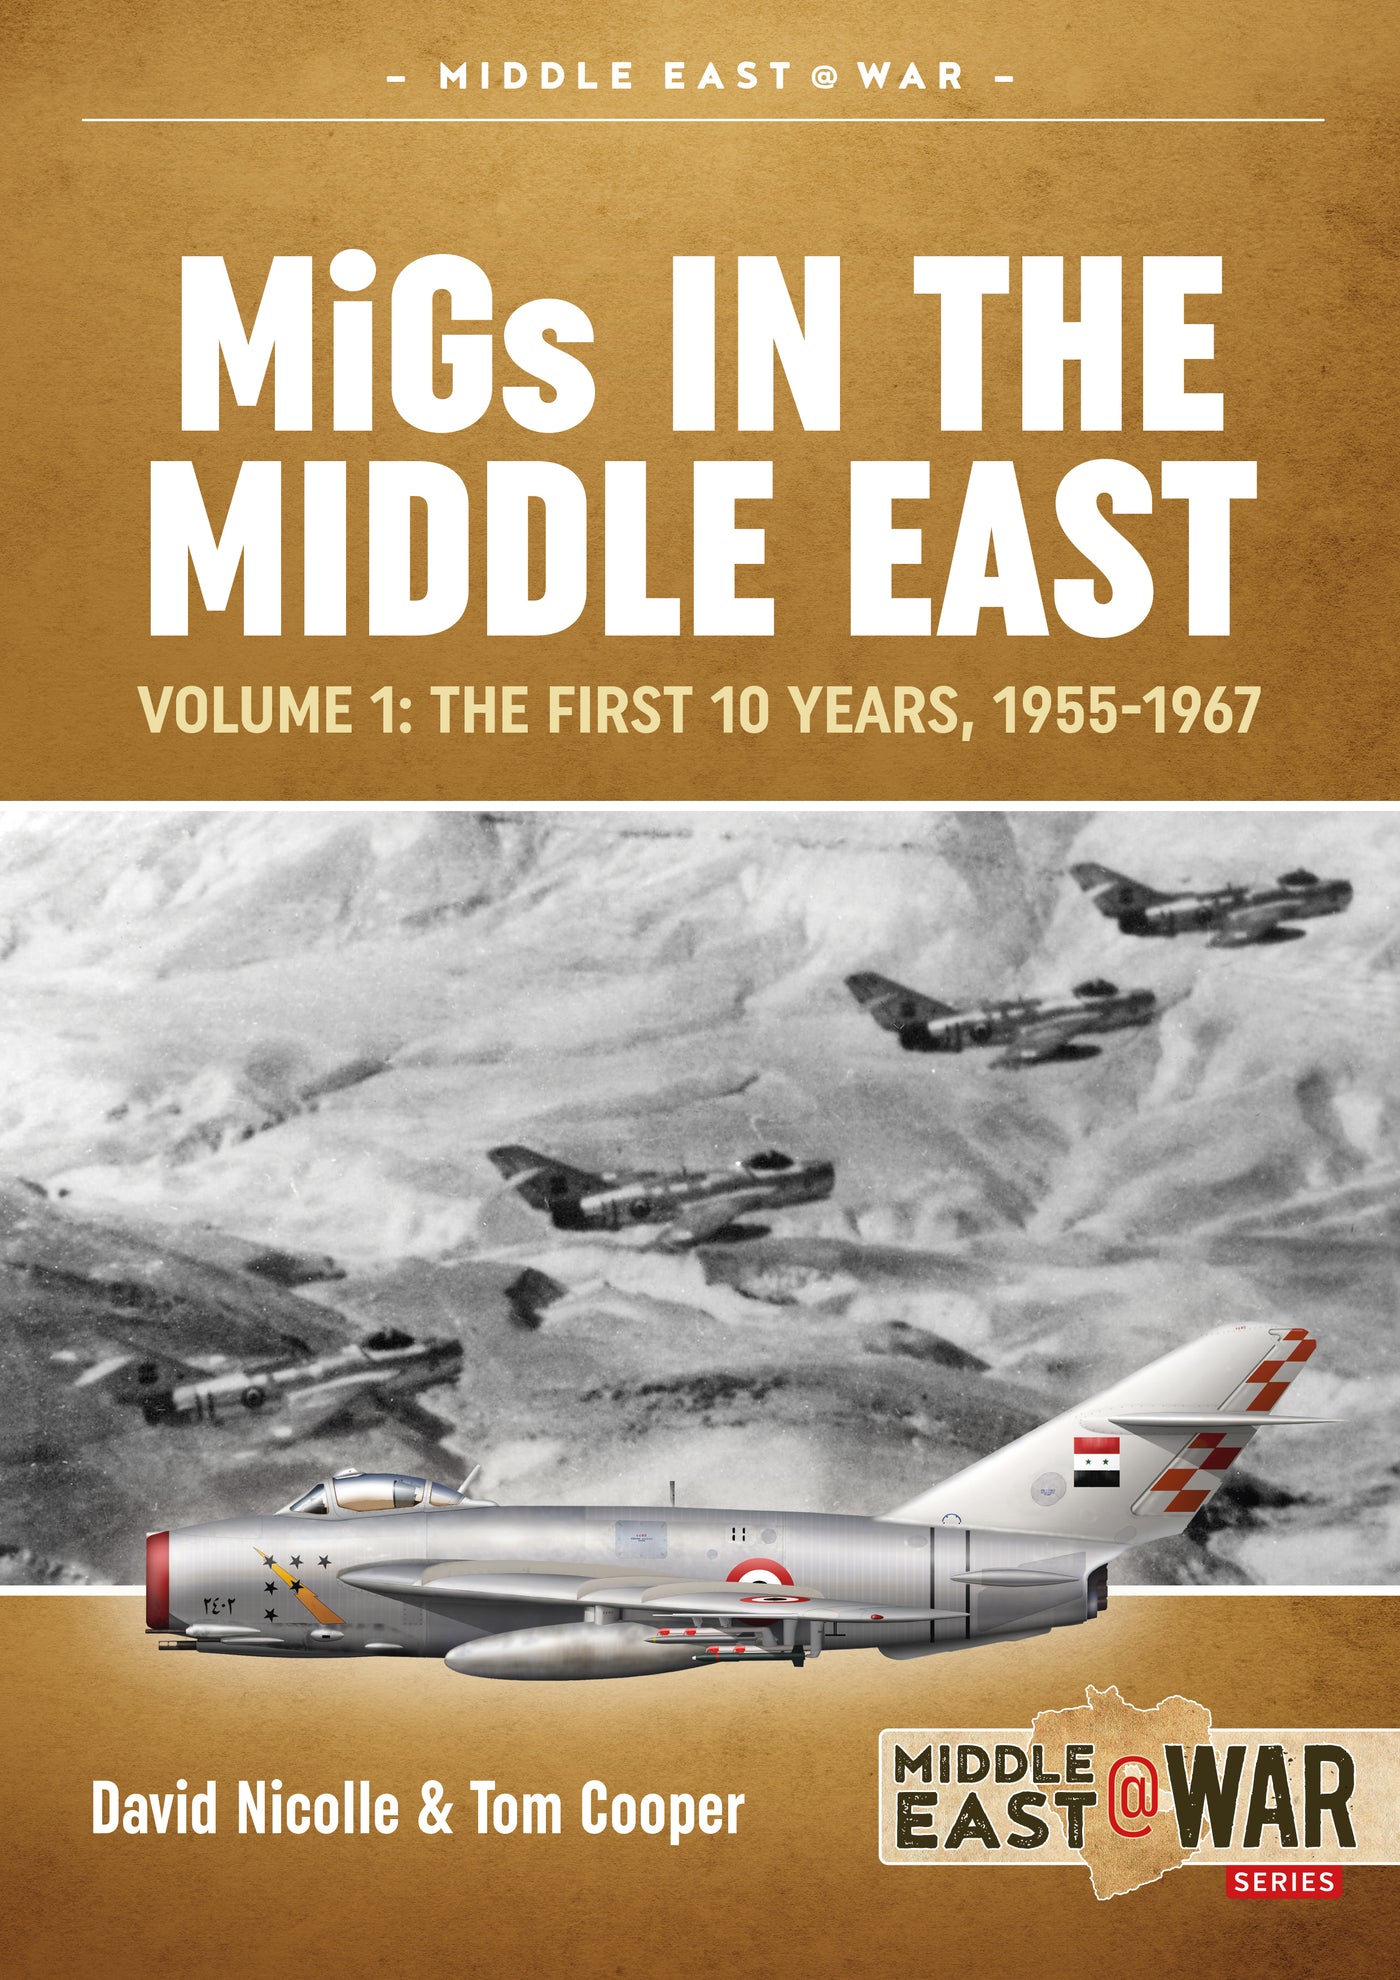 MiGs in the Middle East